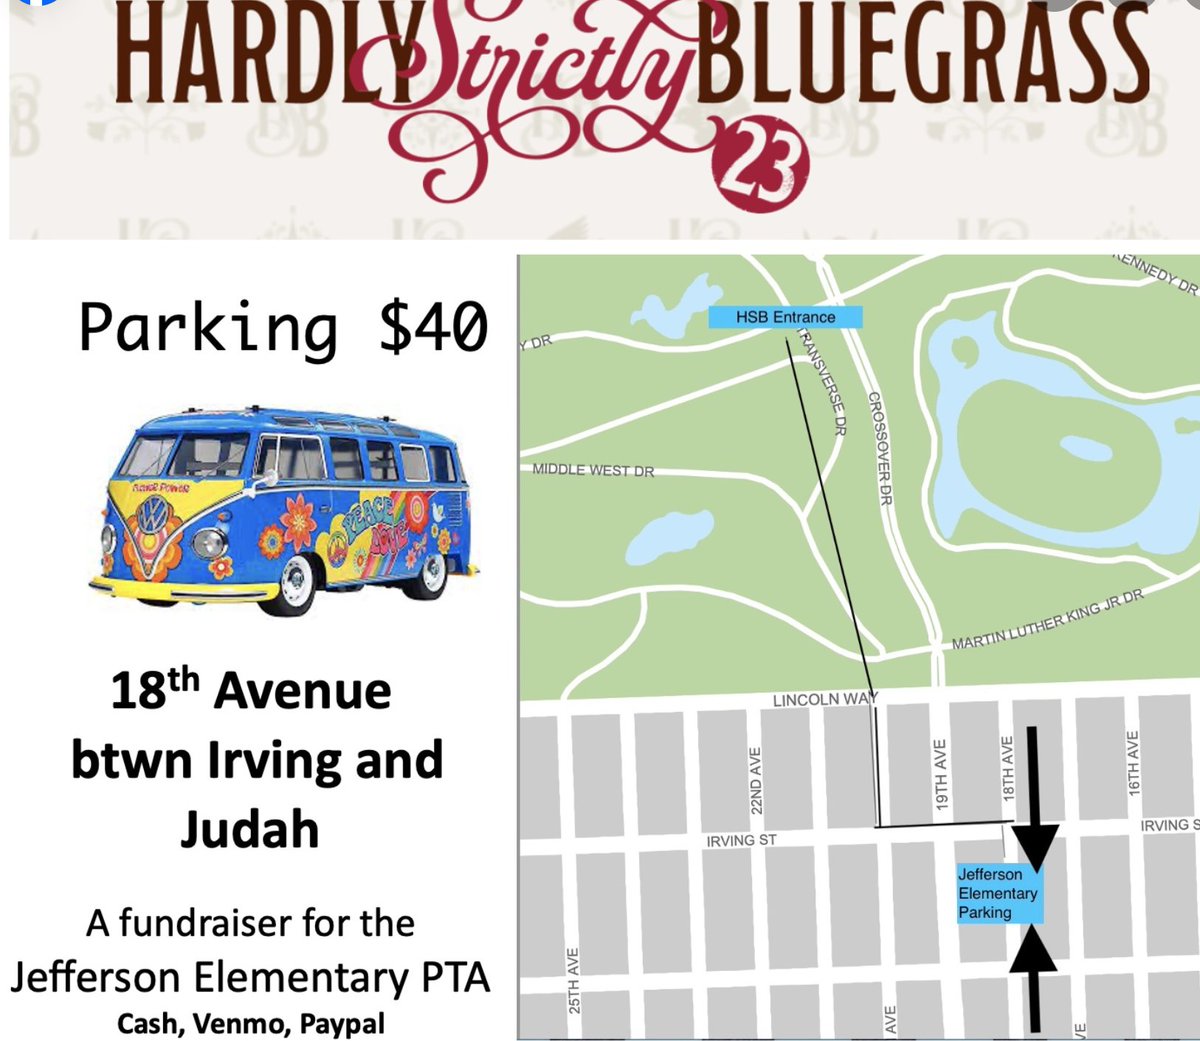 Best place to park for @HSBFest and support a a @sfusd public school Jefferson Elementary #sanfrancisco

#hsb23 #hardlystrictlybluegrass #hsb23app